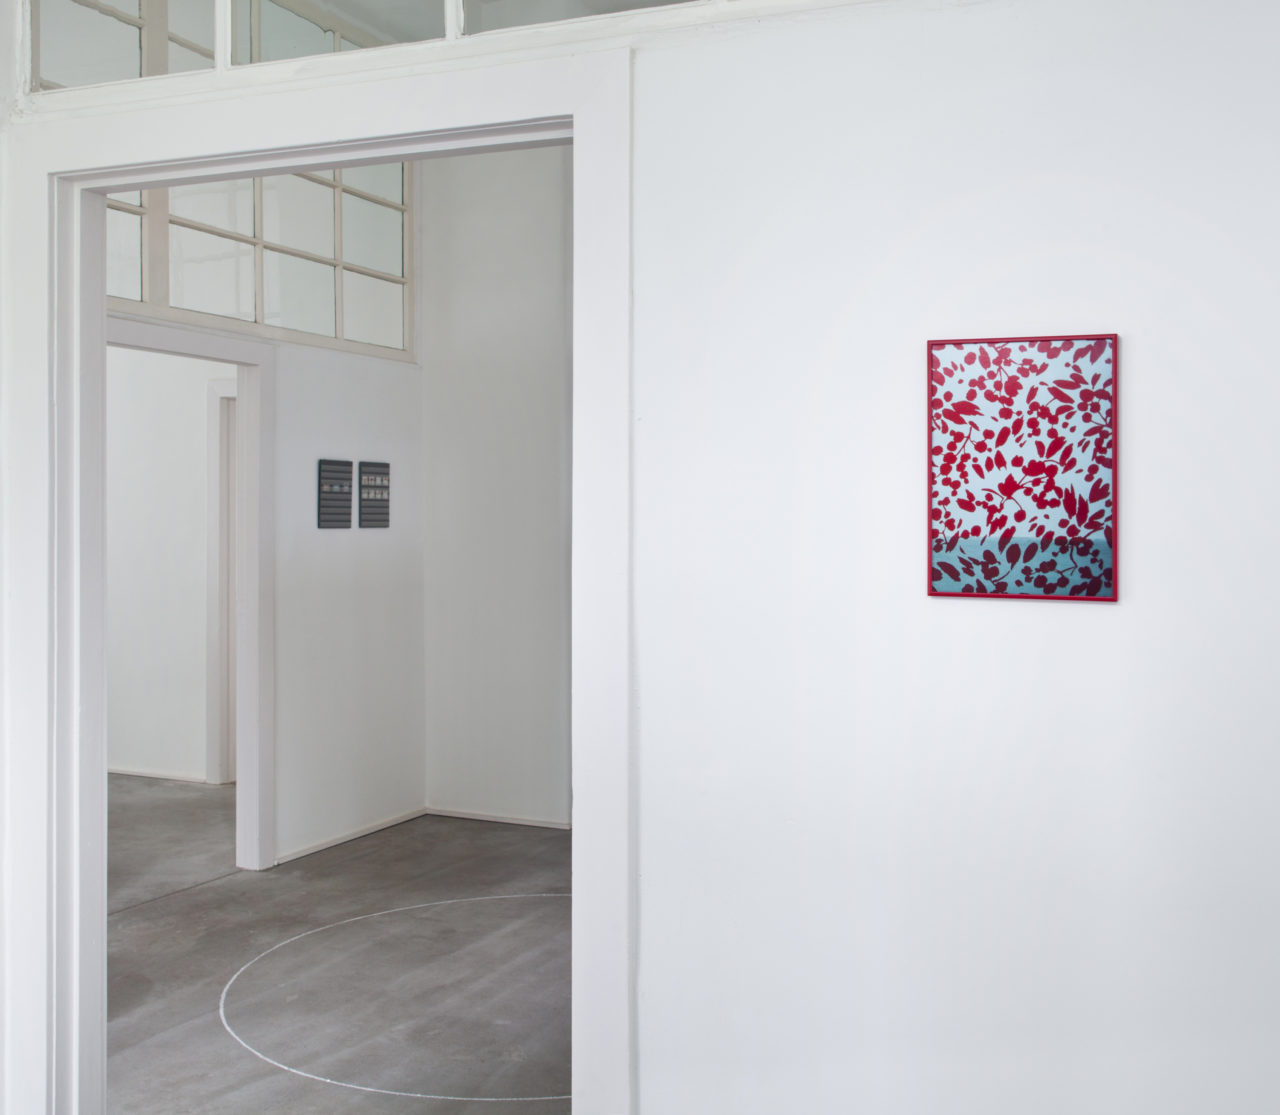 Collected attitudes, Installation view